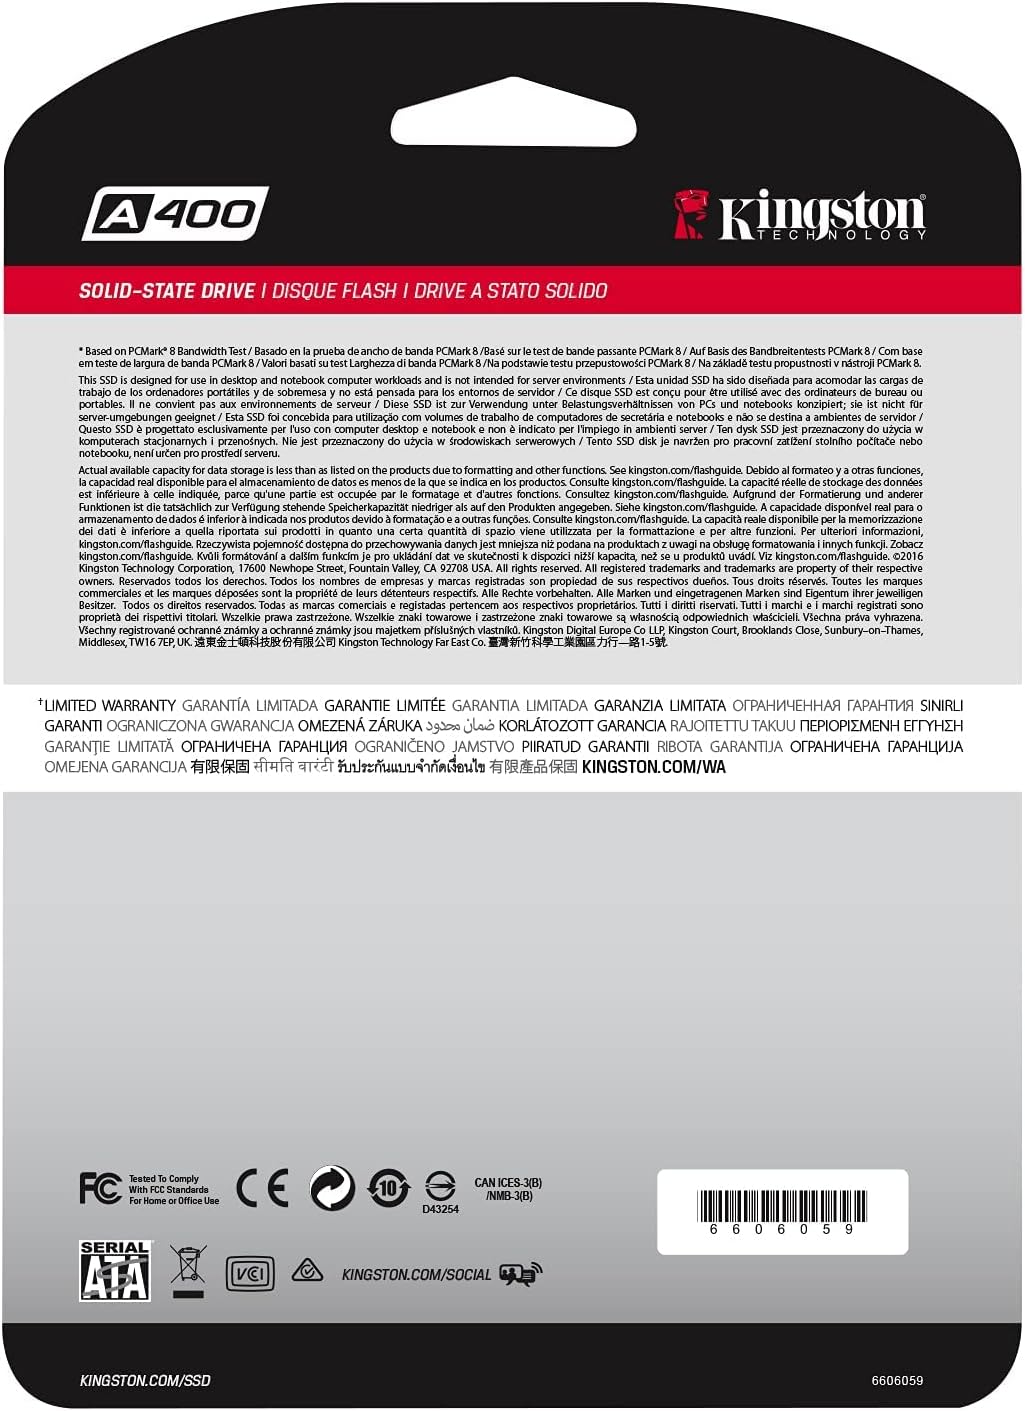 Kingston A400 Solid State Drive 240GB Black